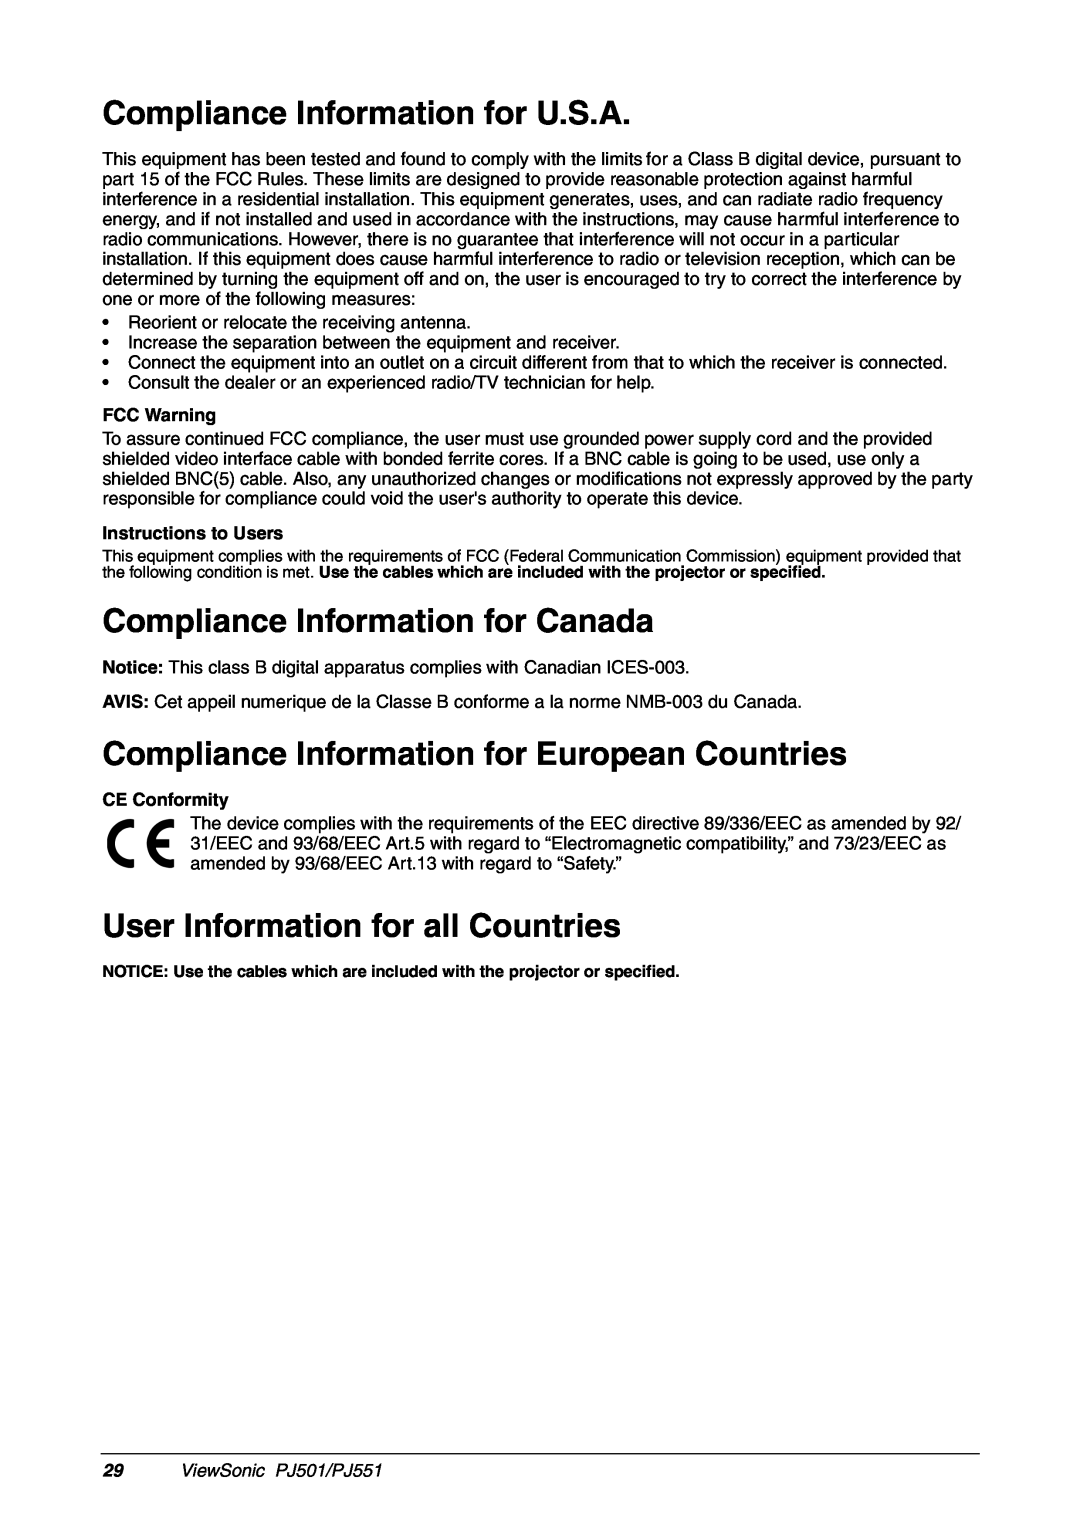 ViewSonic PJ501 Compliance Information for U.S.A, Compliance Information for Canada, User Information for all Countries 